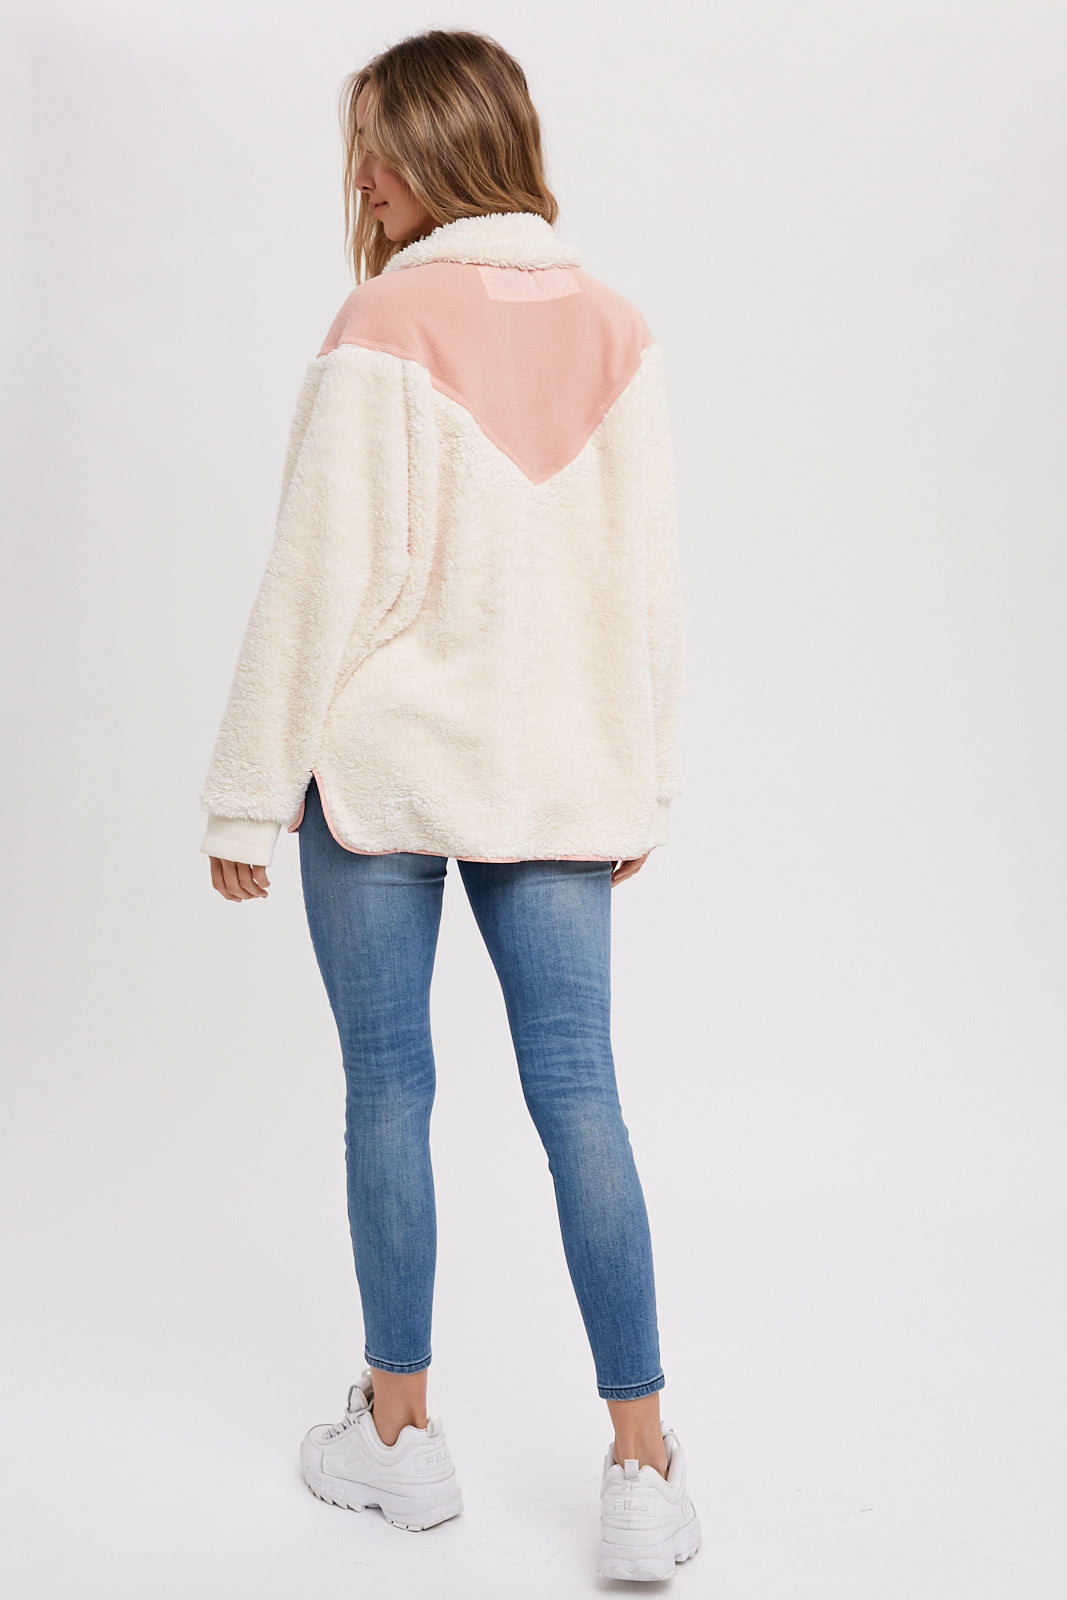 The Kinley Sweater